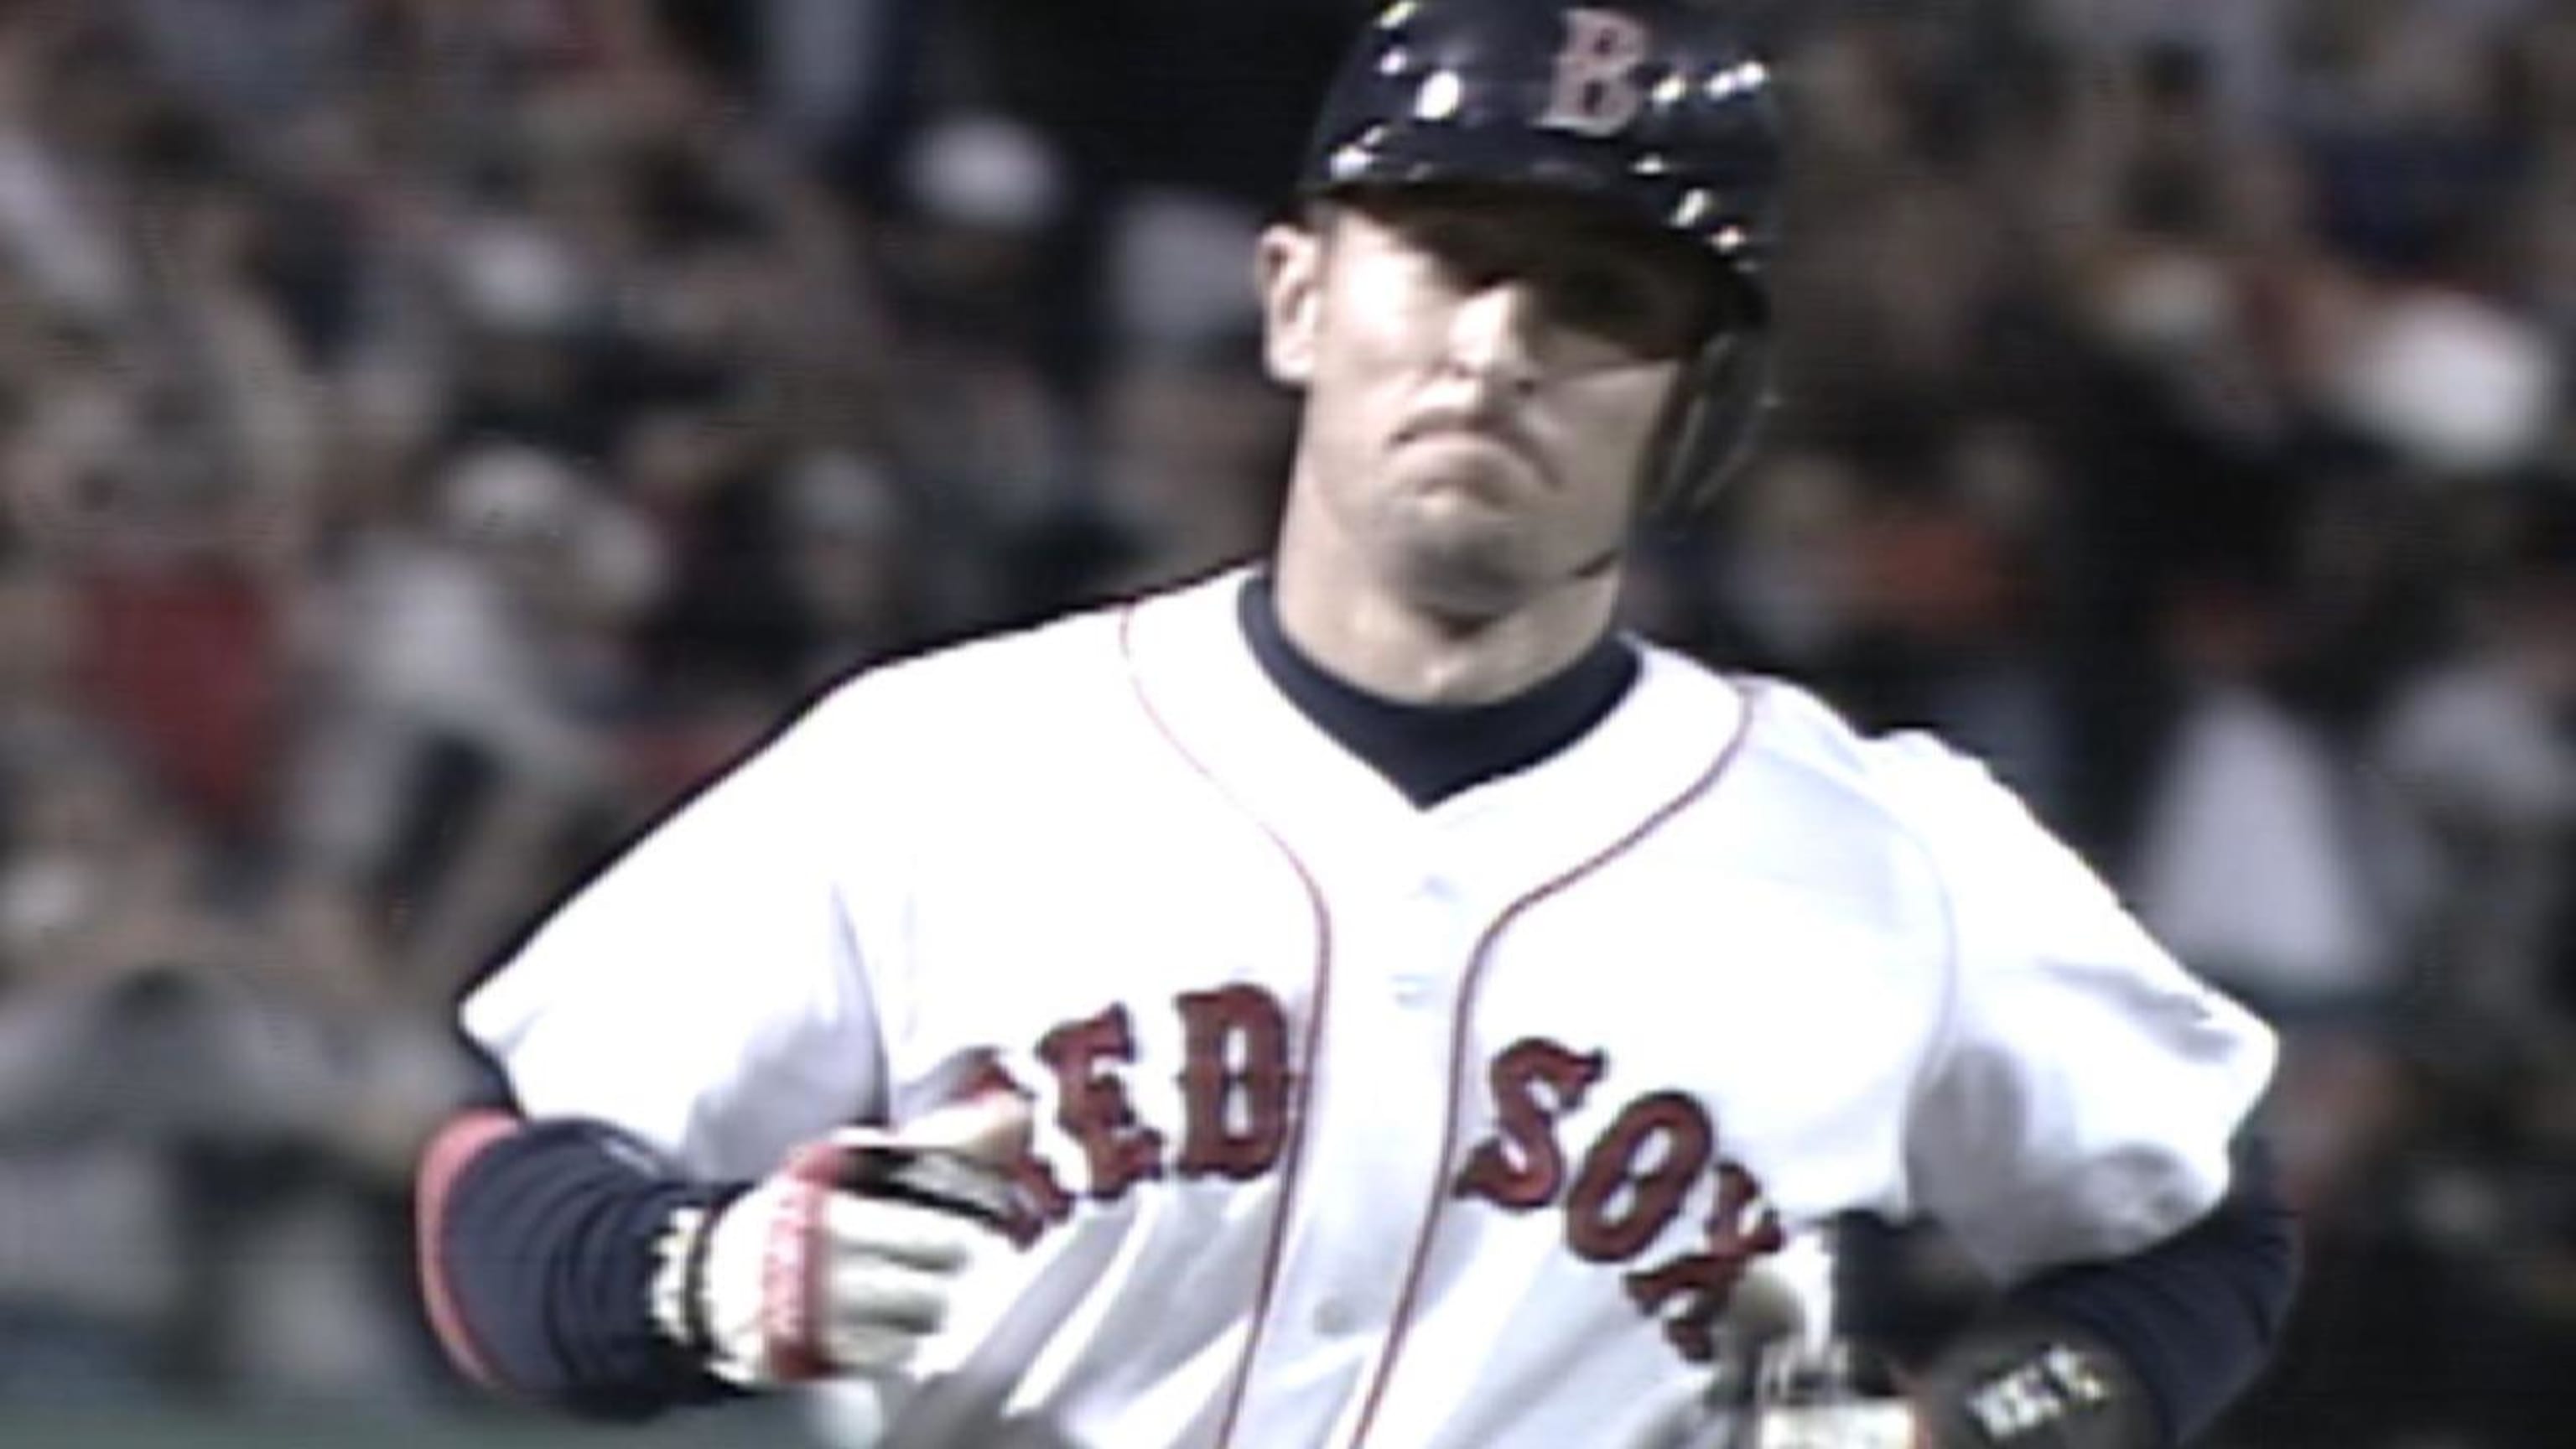 red sox uniforms through the years